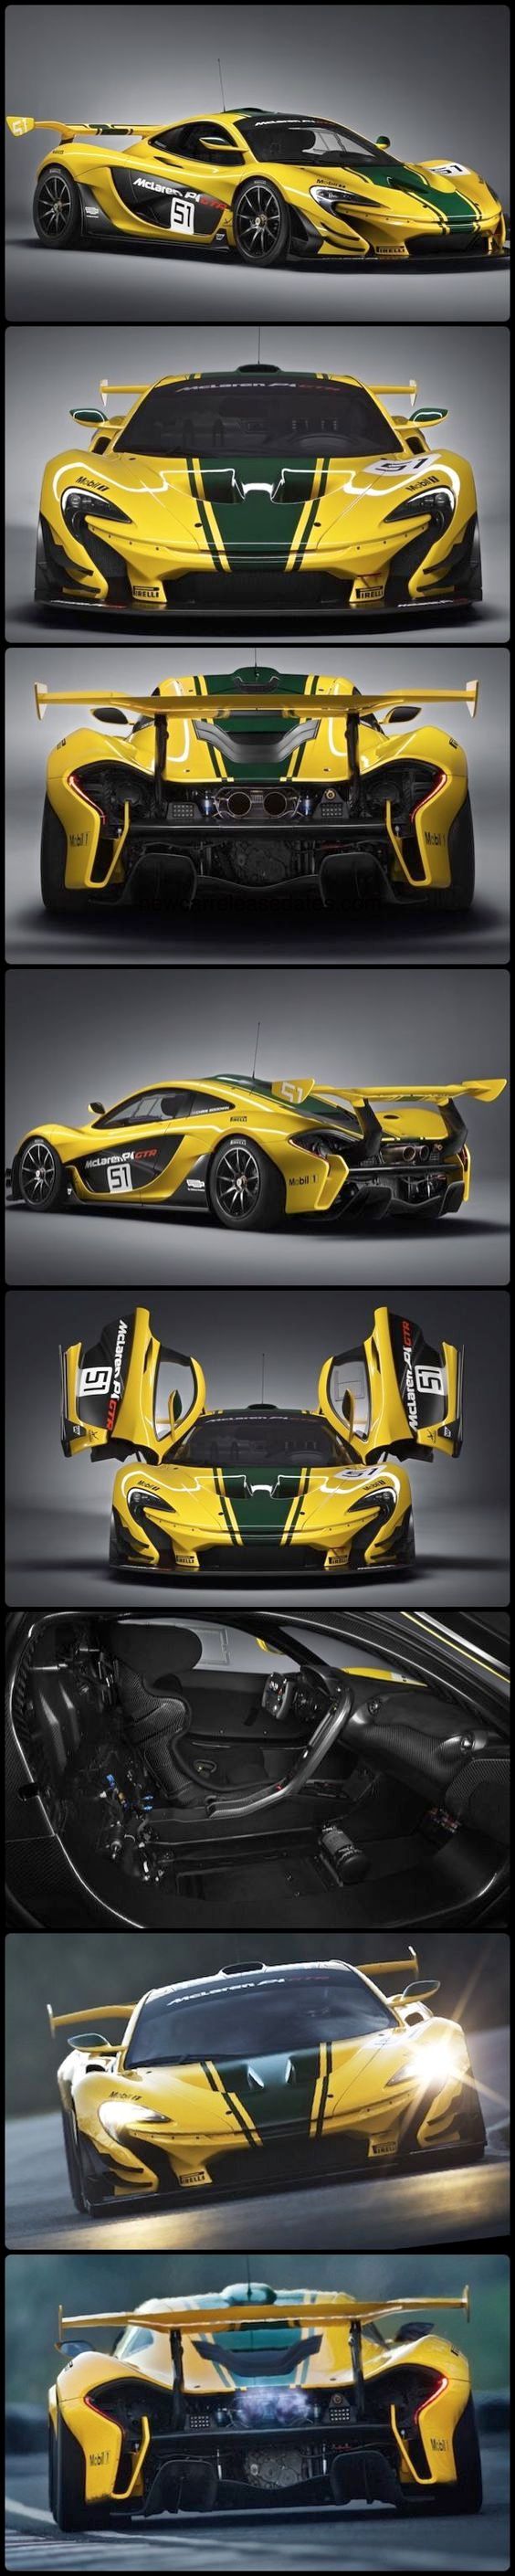 MUST SEE “ 2017 McLaren P1 GTR“, 2017 Concept Car Photos and Images, 2017 Cars